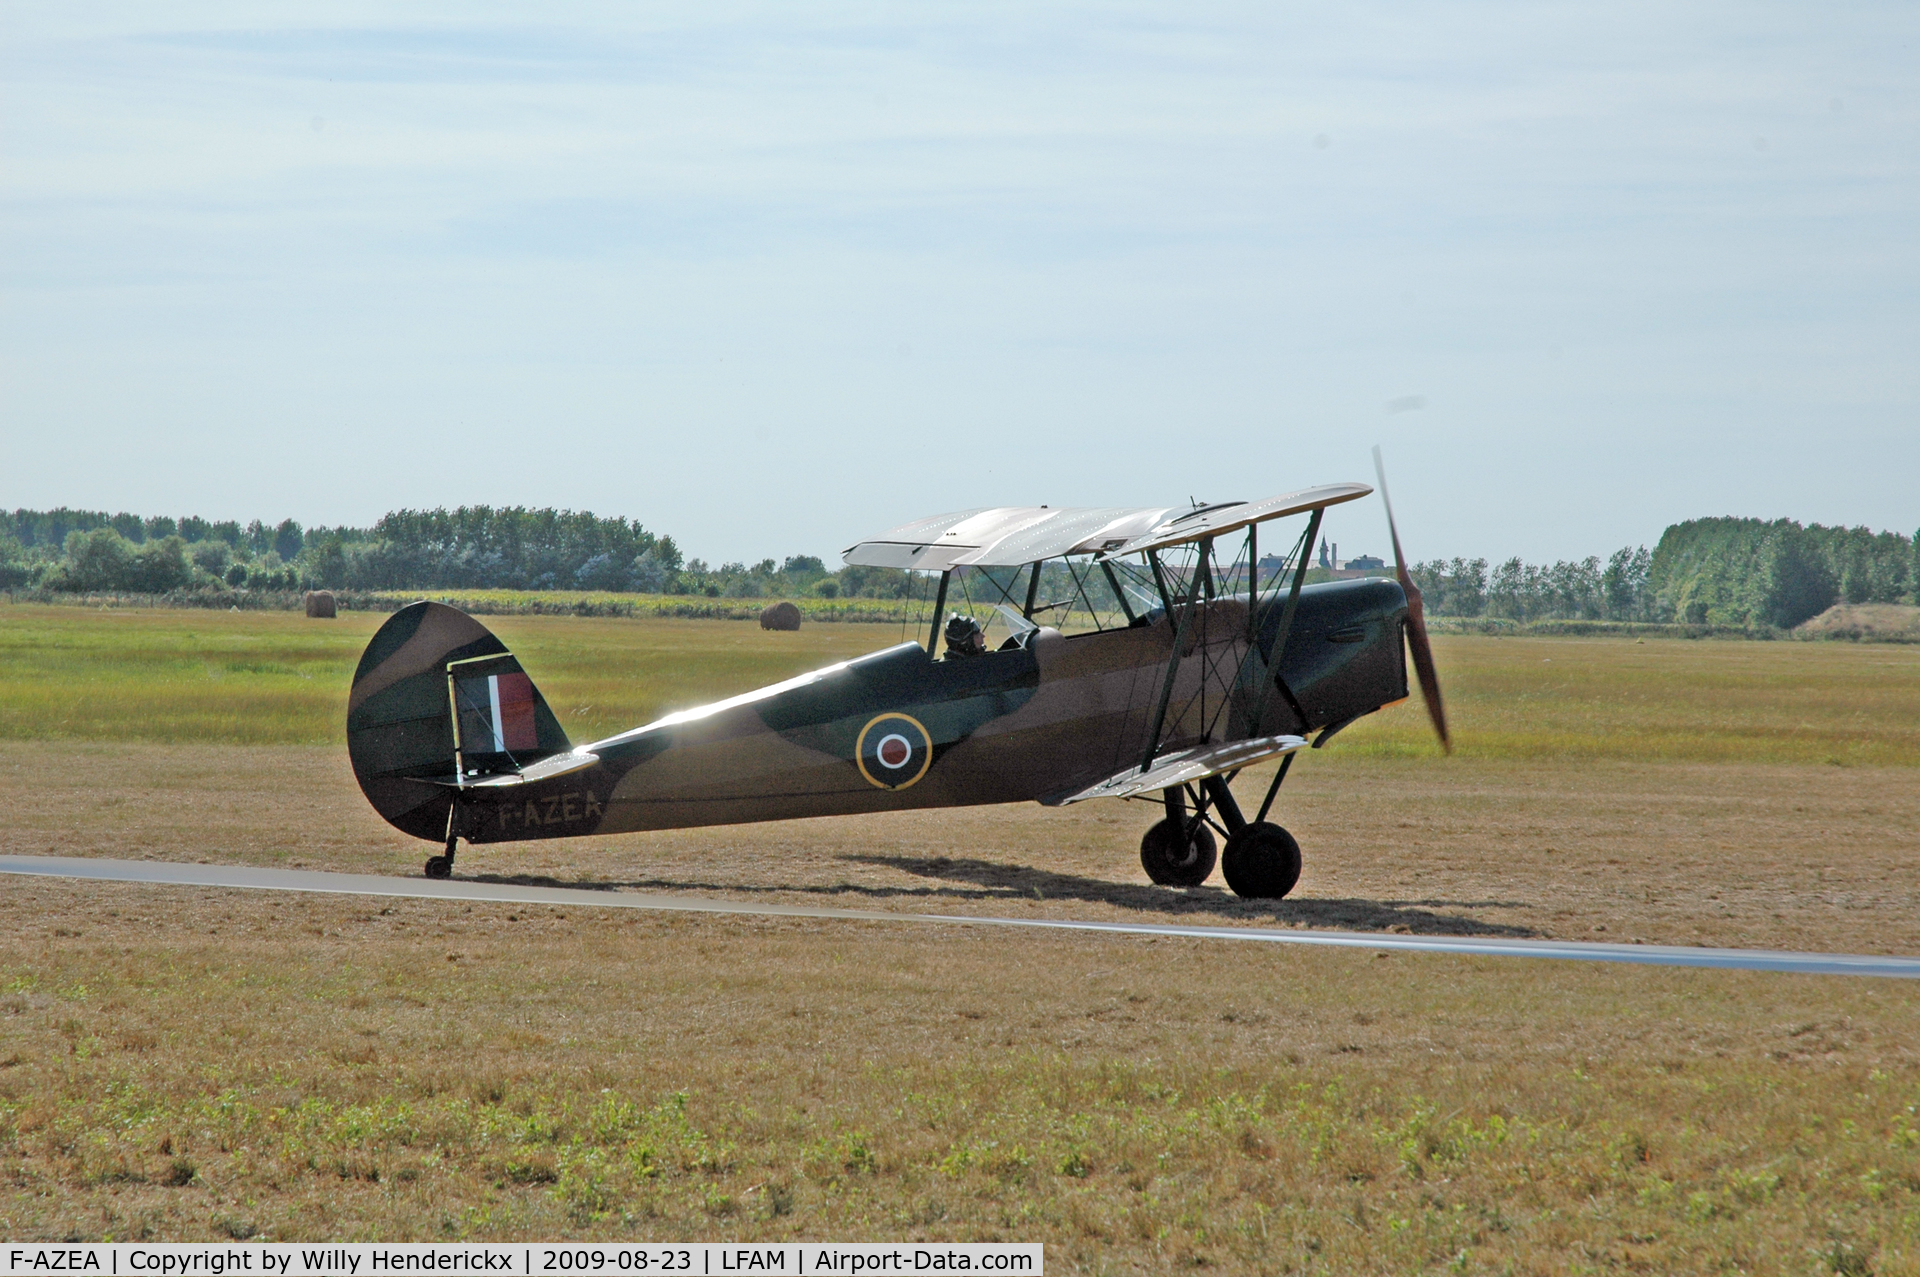 F-AZEA, Stampe-Vertongen SV-4B C/N Not found F-AZEA, Waiting for take-off clearance